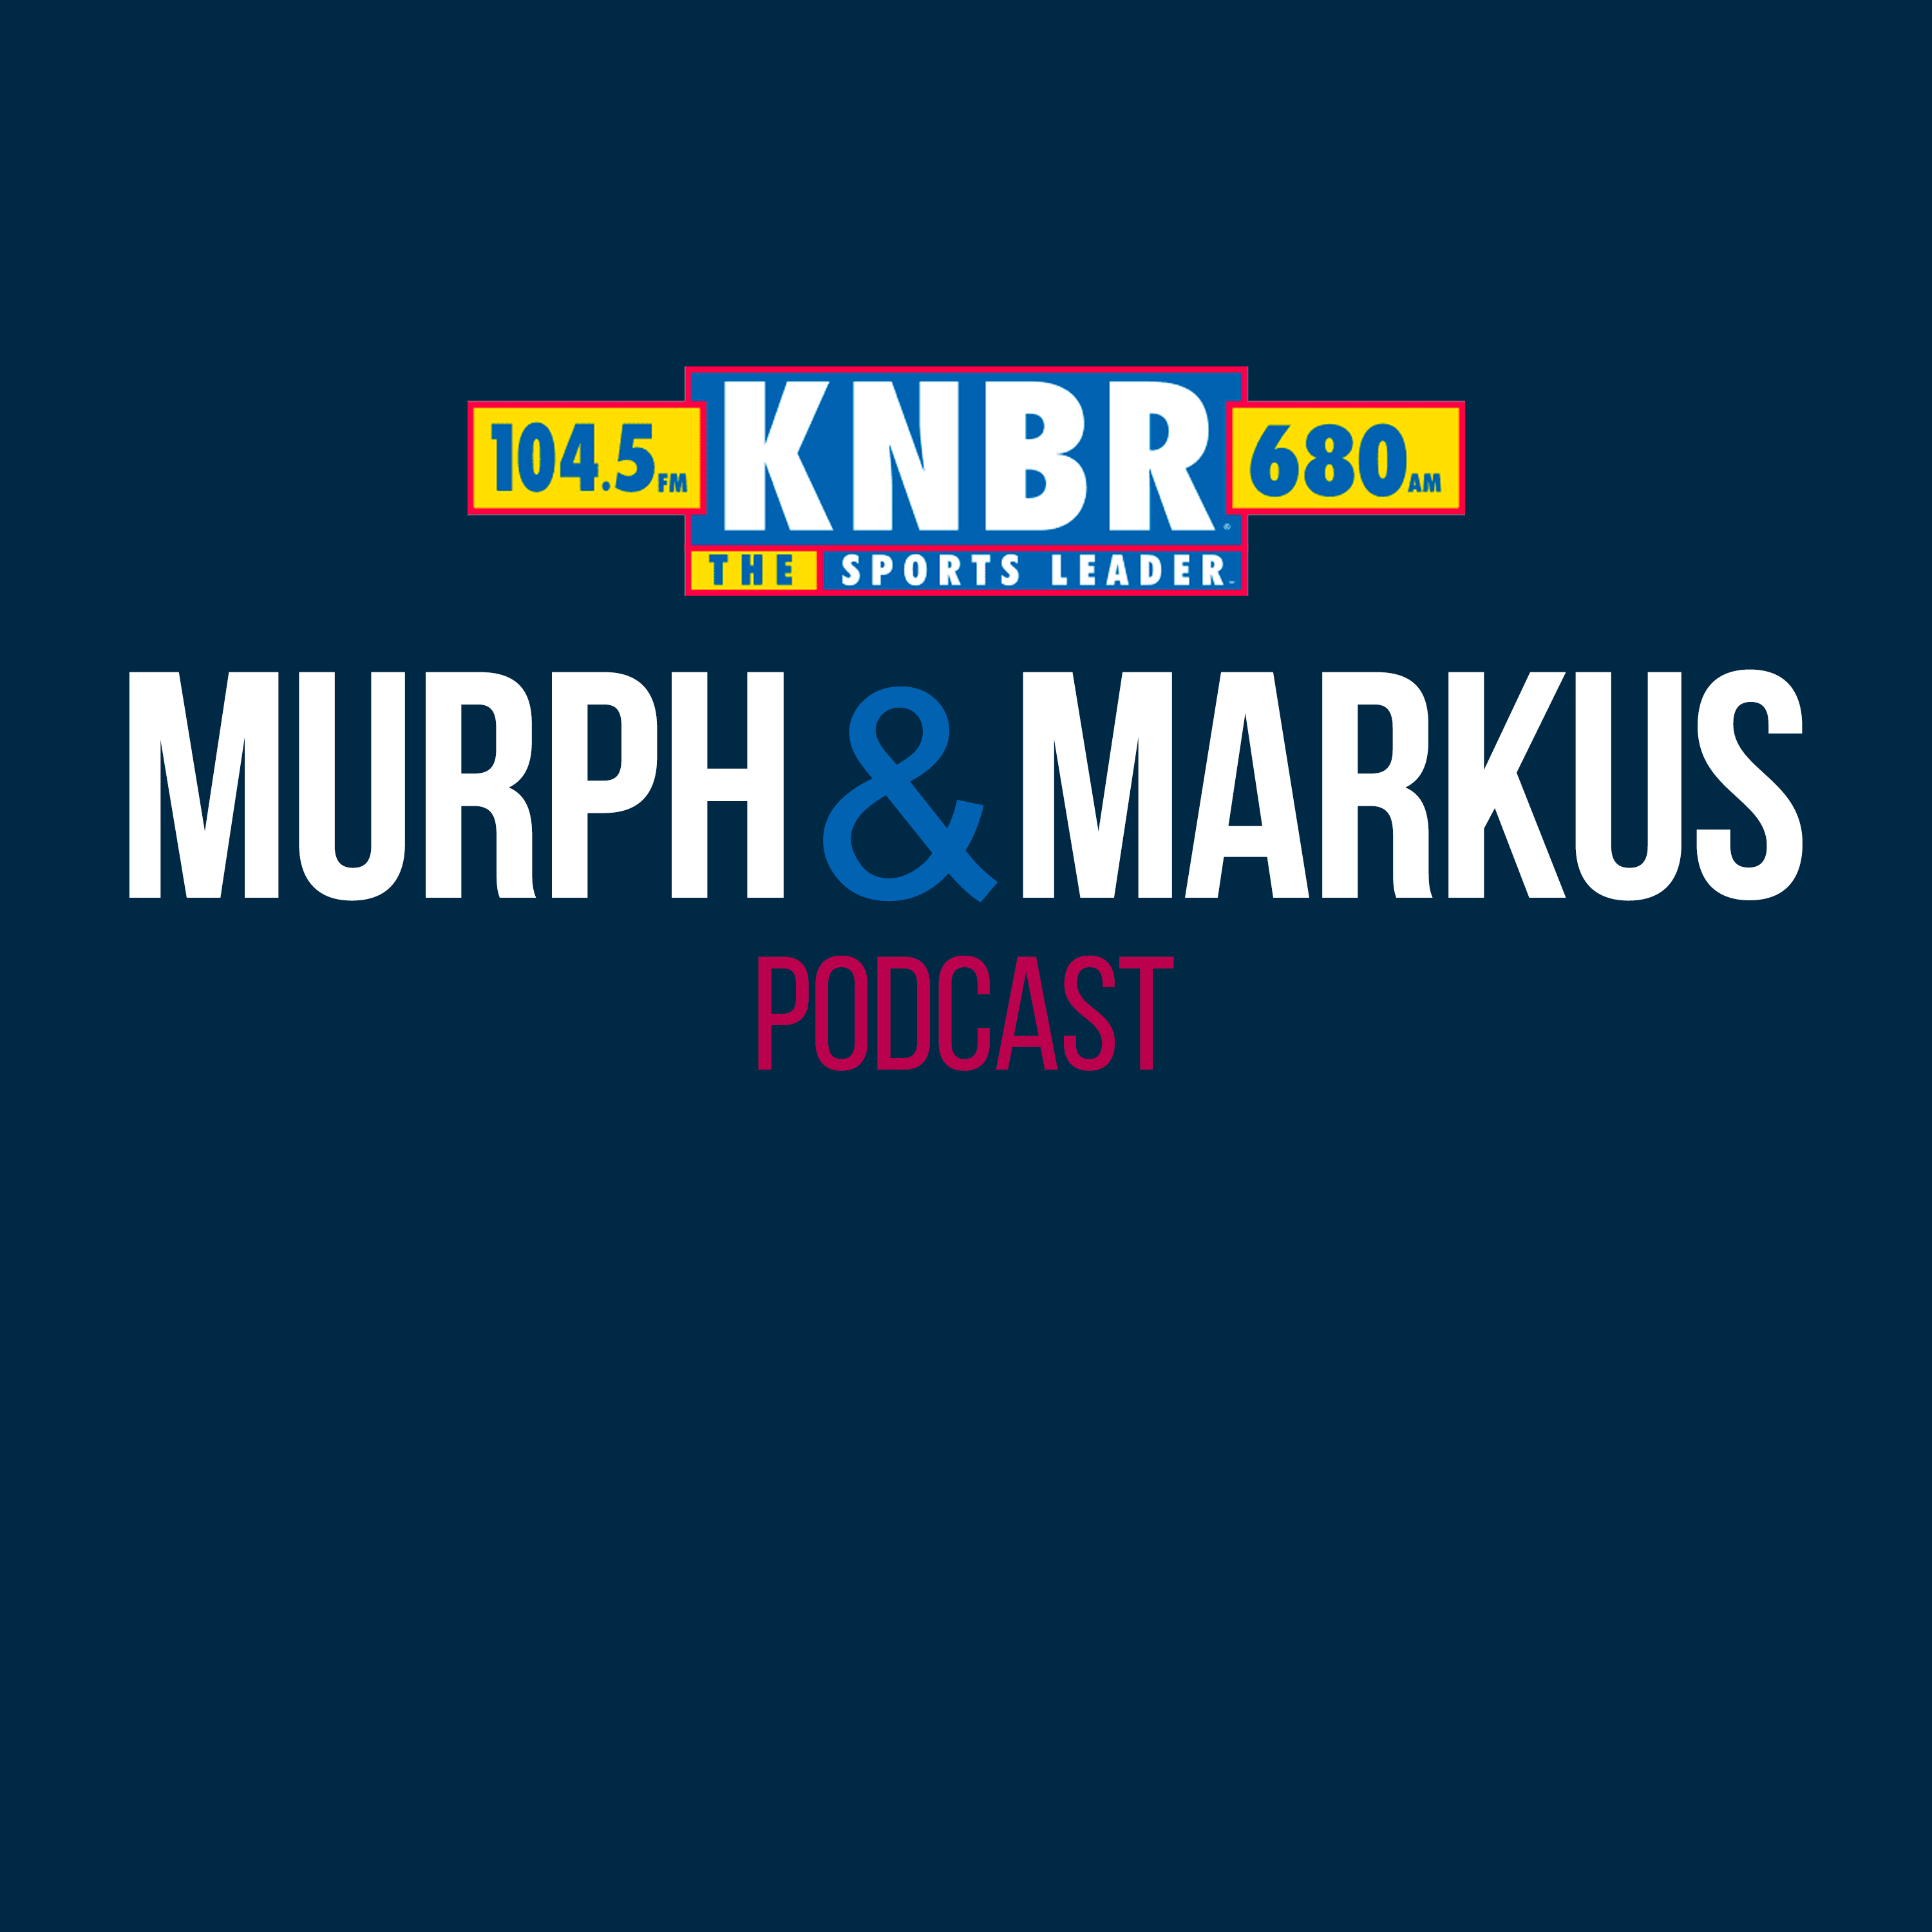 4-19 Hour 1: Murph & Markus react to Logan Webb shutting out the D-Backs last night, share their thoughts on Mike Dunleavy's comments from his press conference yesterday, & discuss what the Warriors roster will look like next season